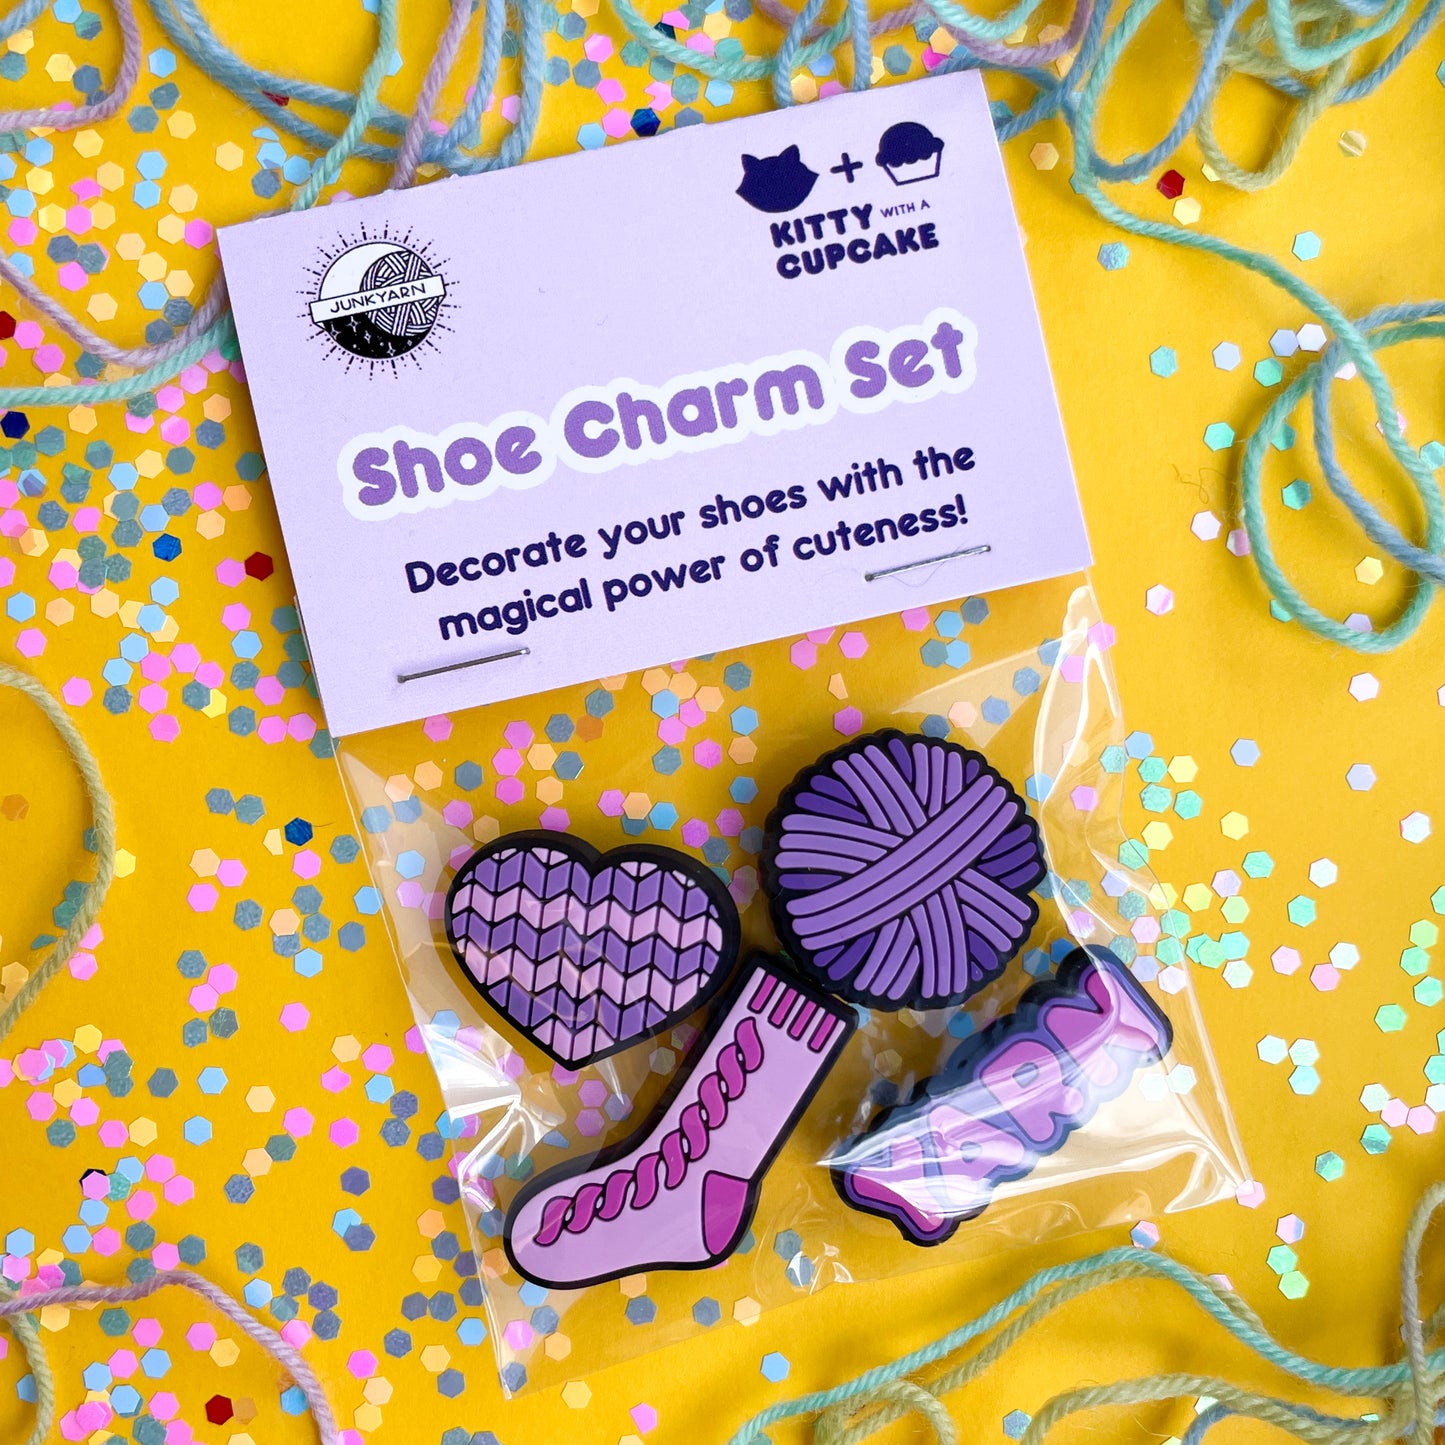 A plastic bag with a header card that reads "Shoe charm set". The bag has charms in it shaped like a heart, yarn ball, sock, and the word yarn. 